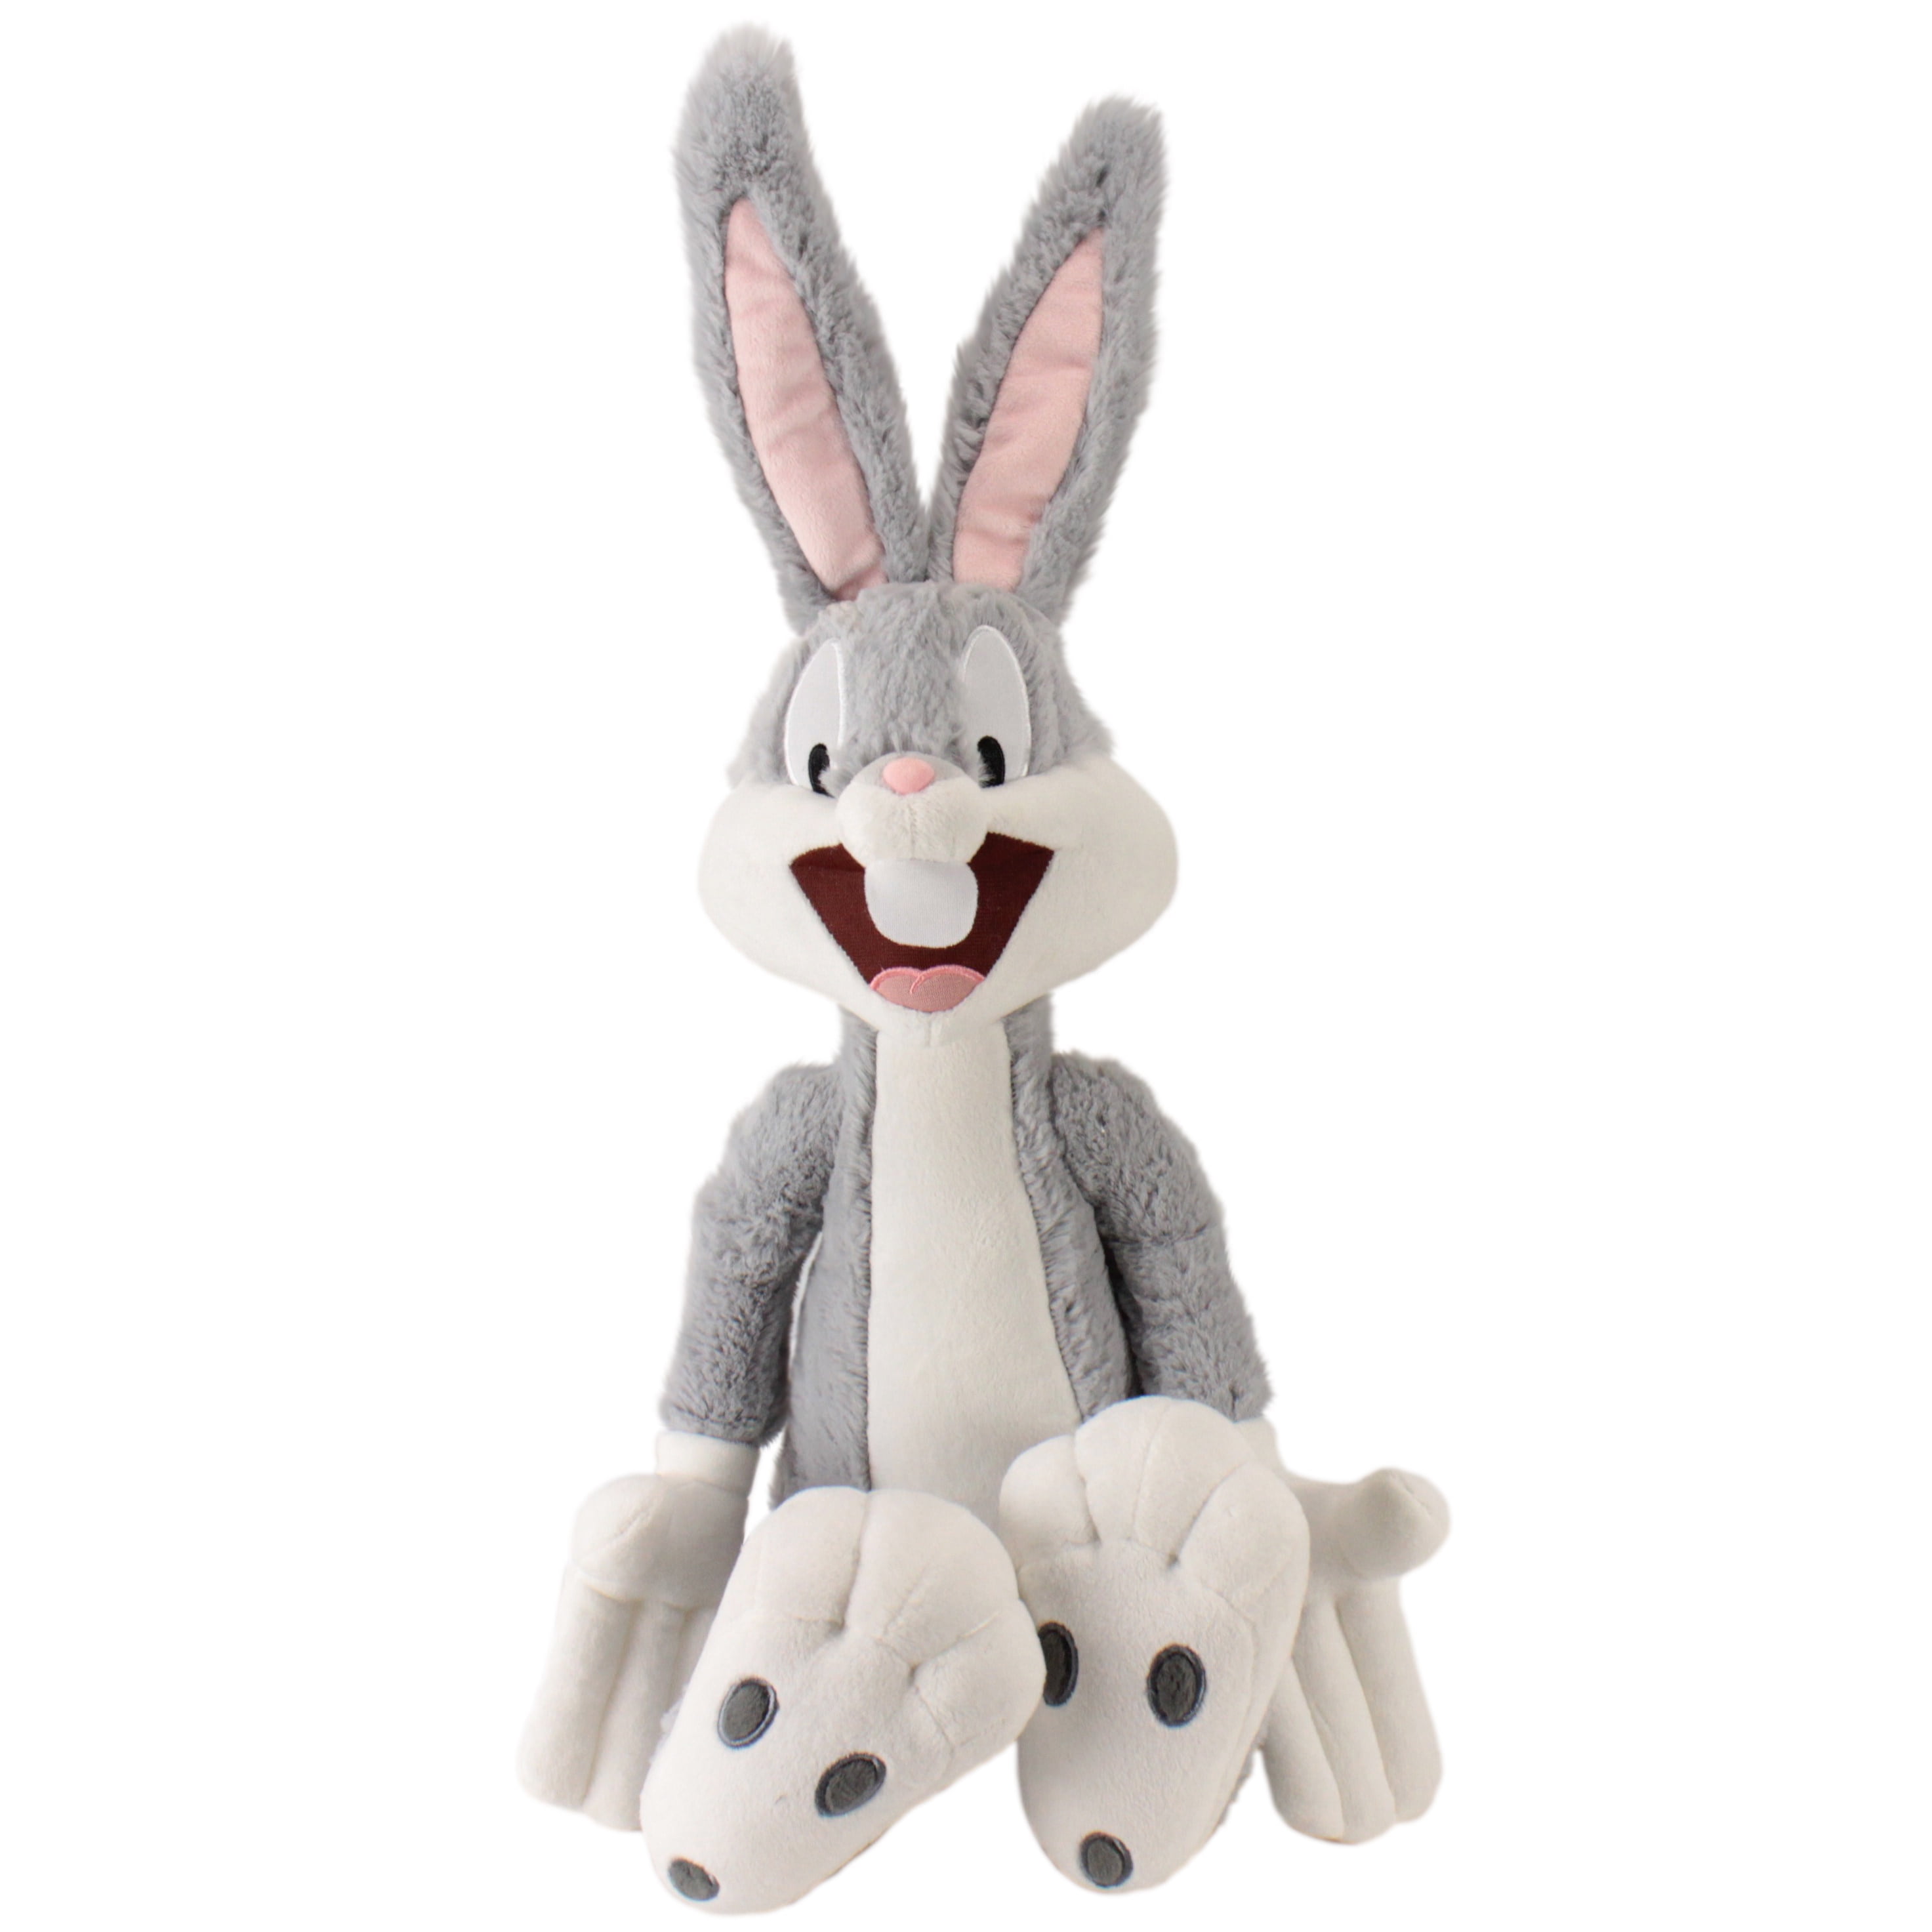 Collectible Plush Bugs Bunny Doll 